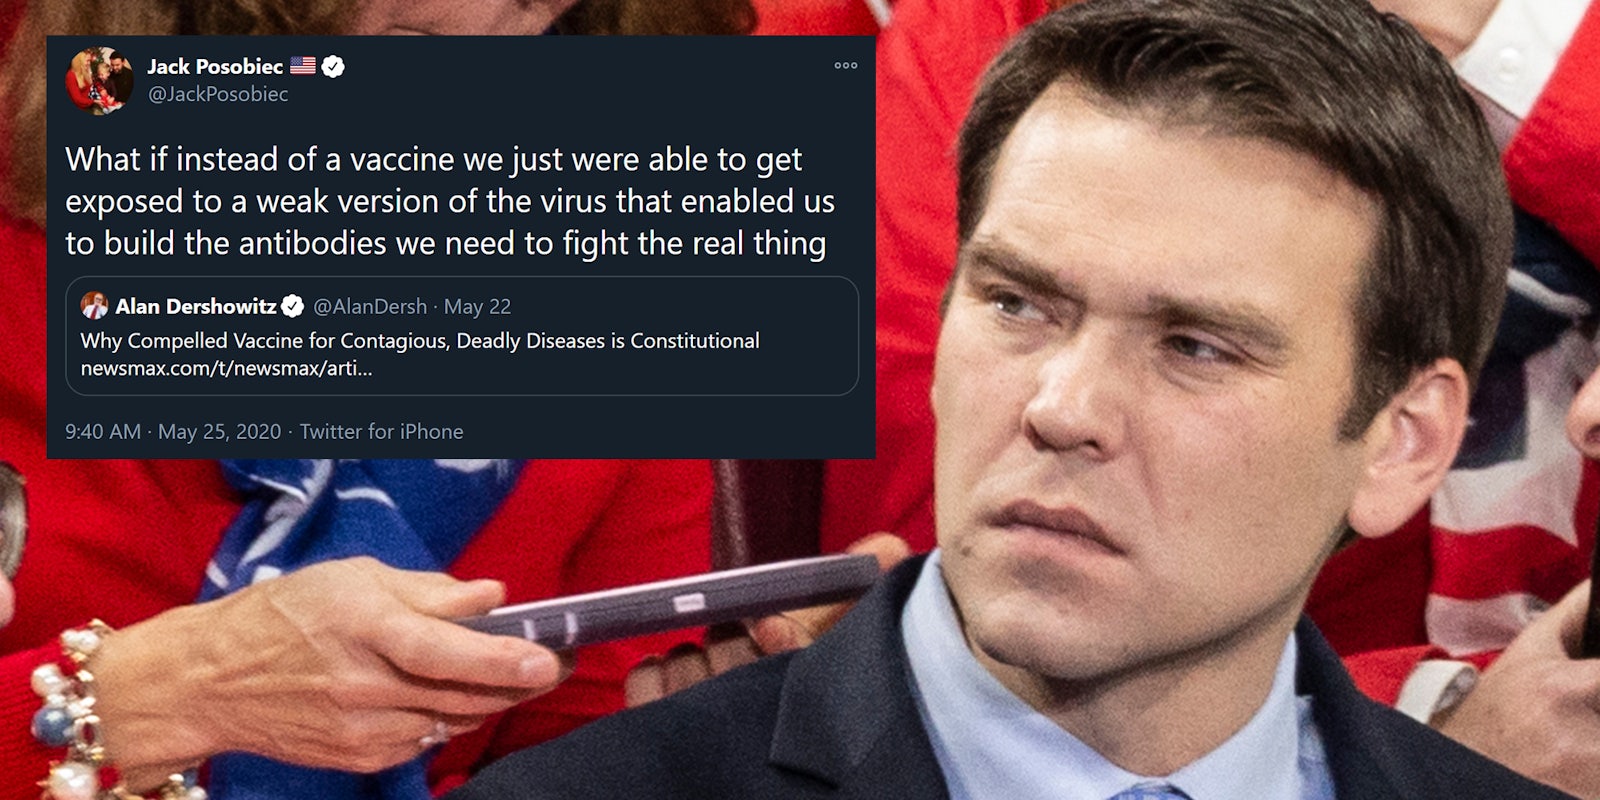 jack posobiec with 'what if instead of a vaccine we just were able to get exposed to a weak version of the virus that enabled us to build the antibodies we need to fight the real thing' tweet